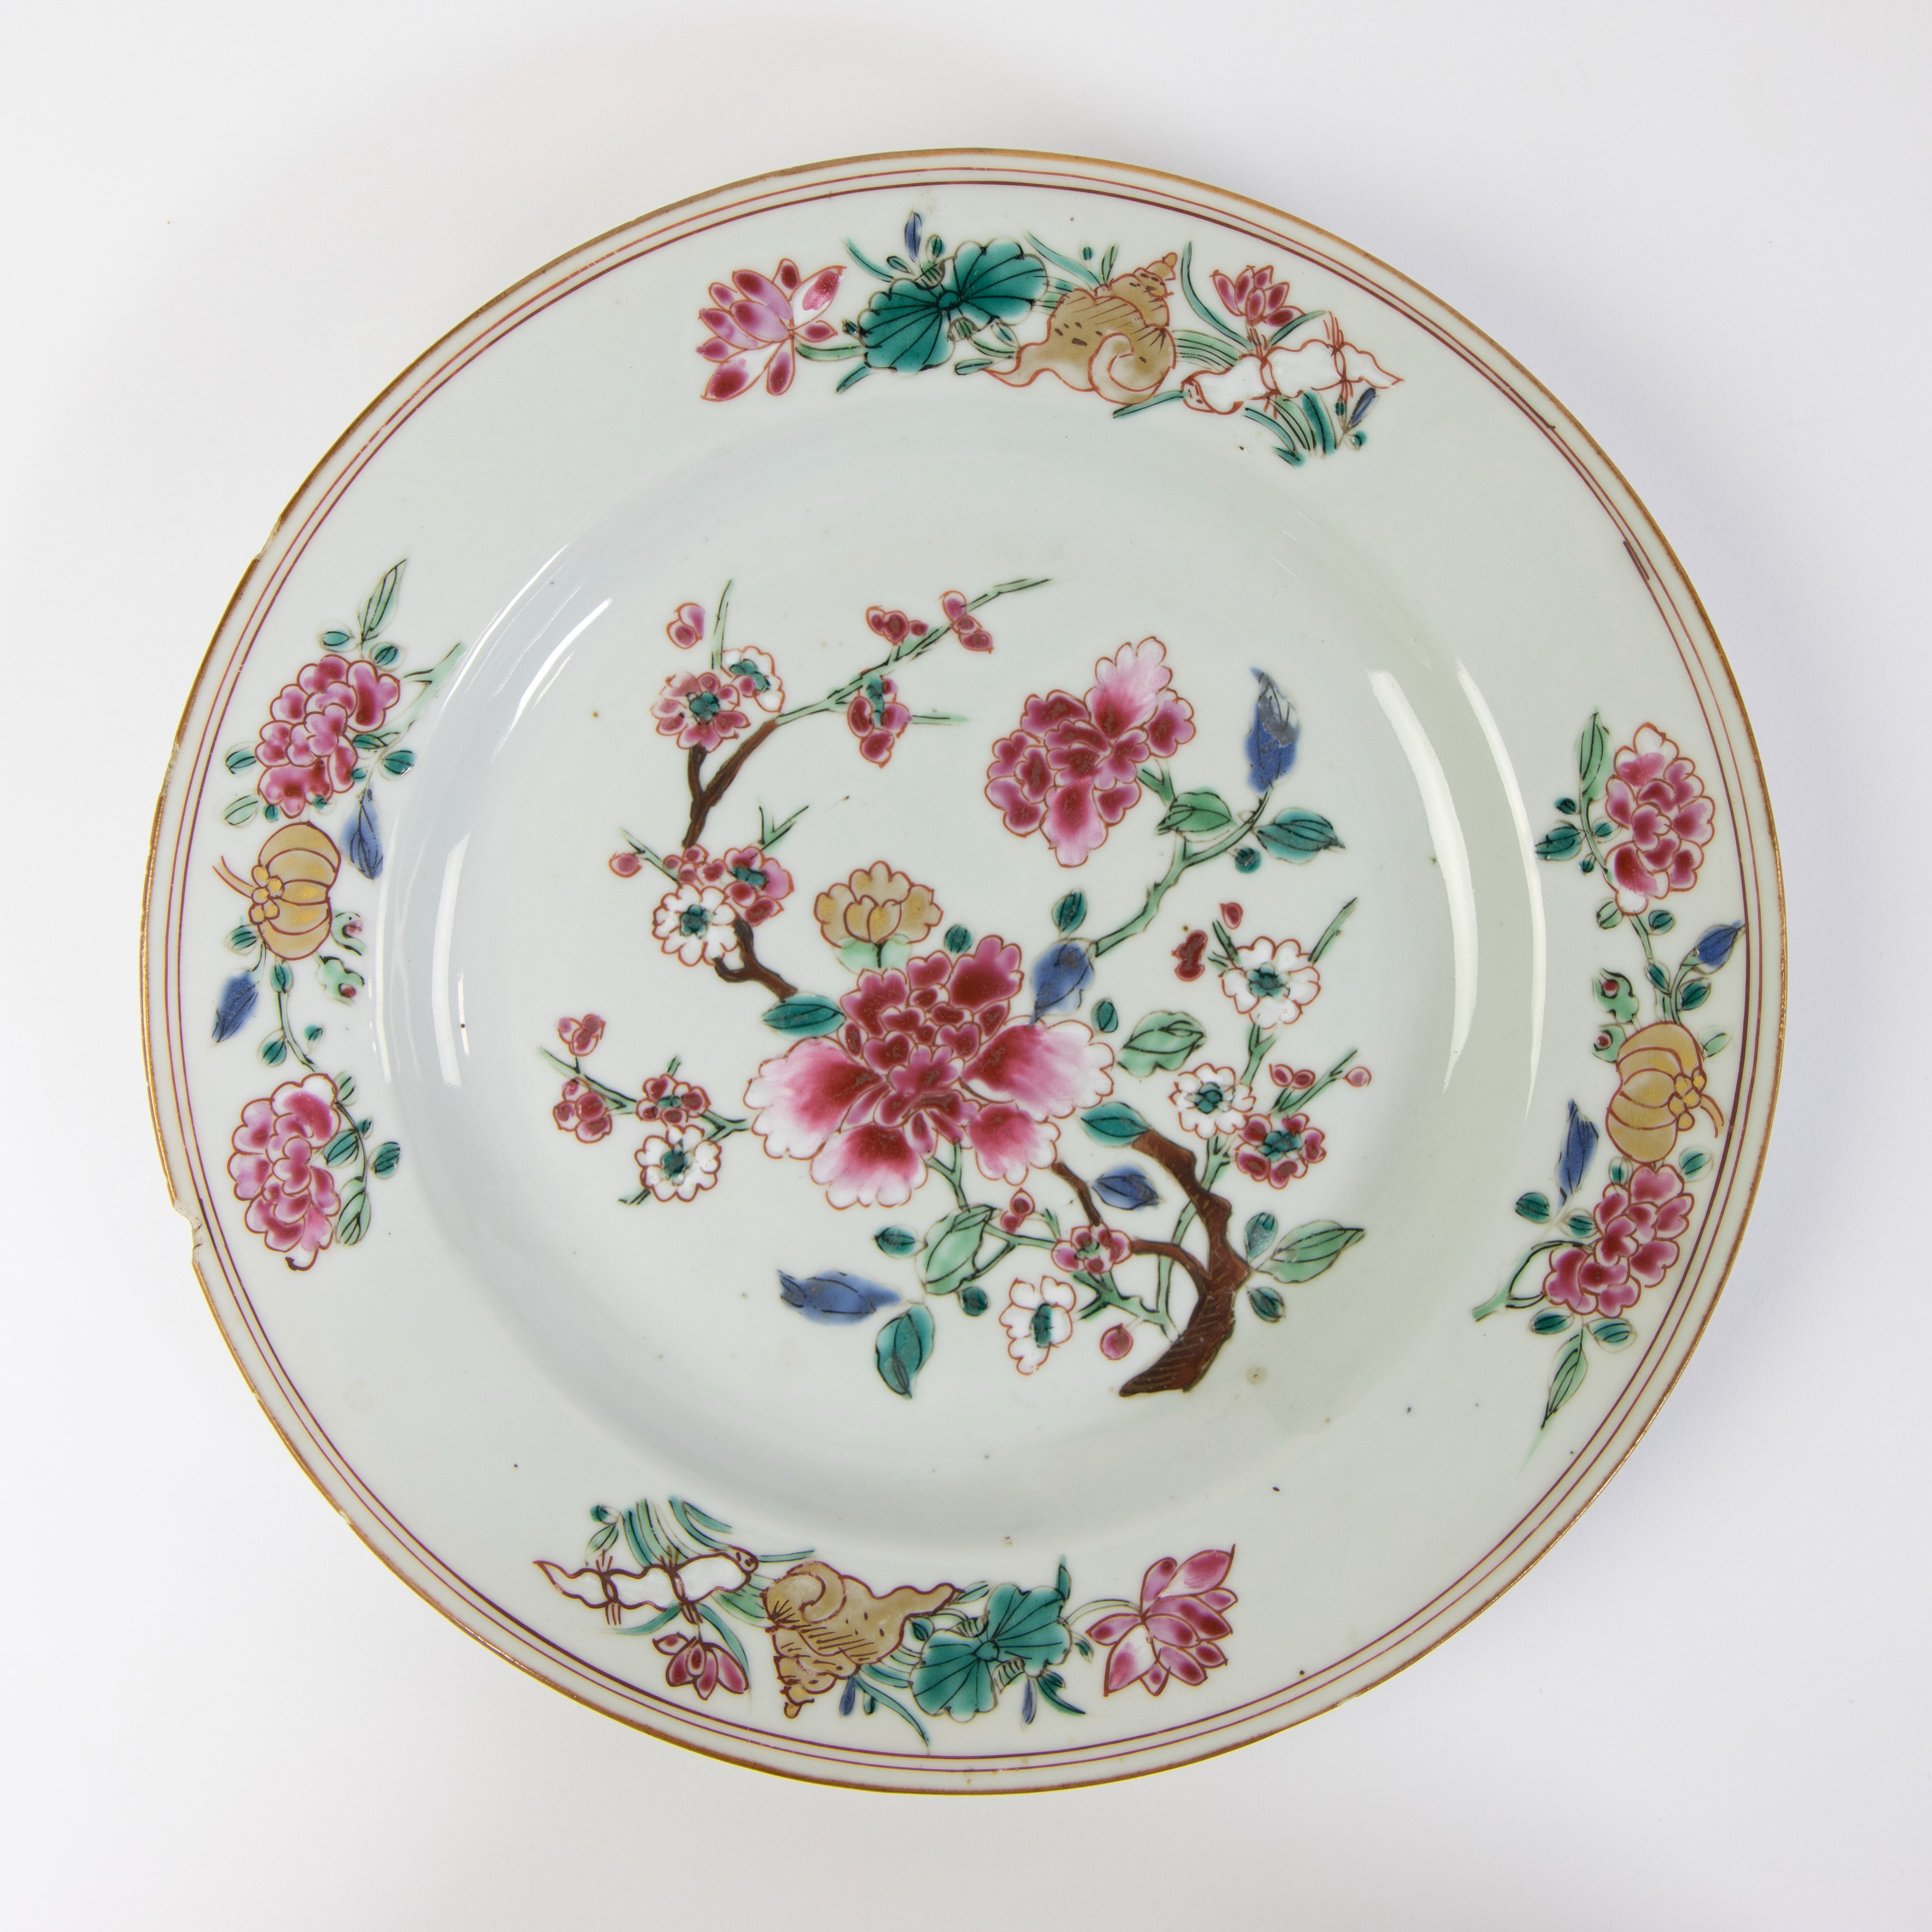 Lot of 5 Chinese famille rose plates, 18th century - Image 6 of 18